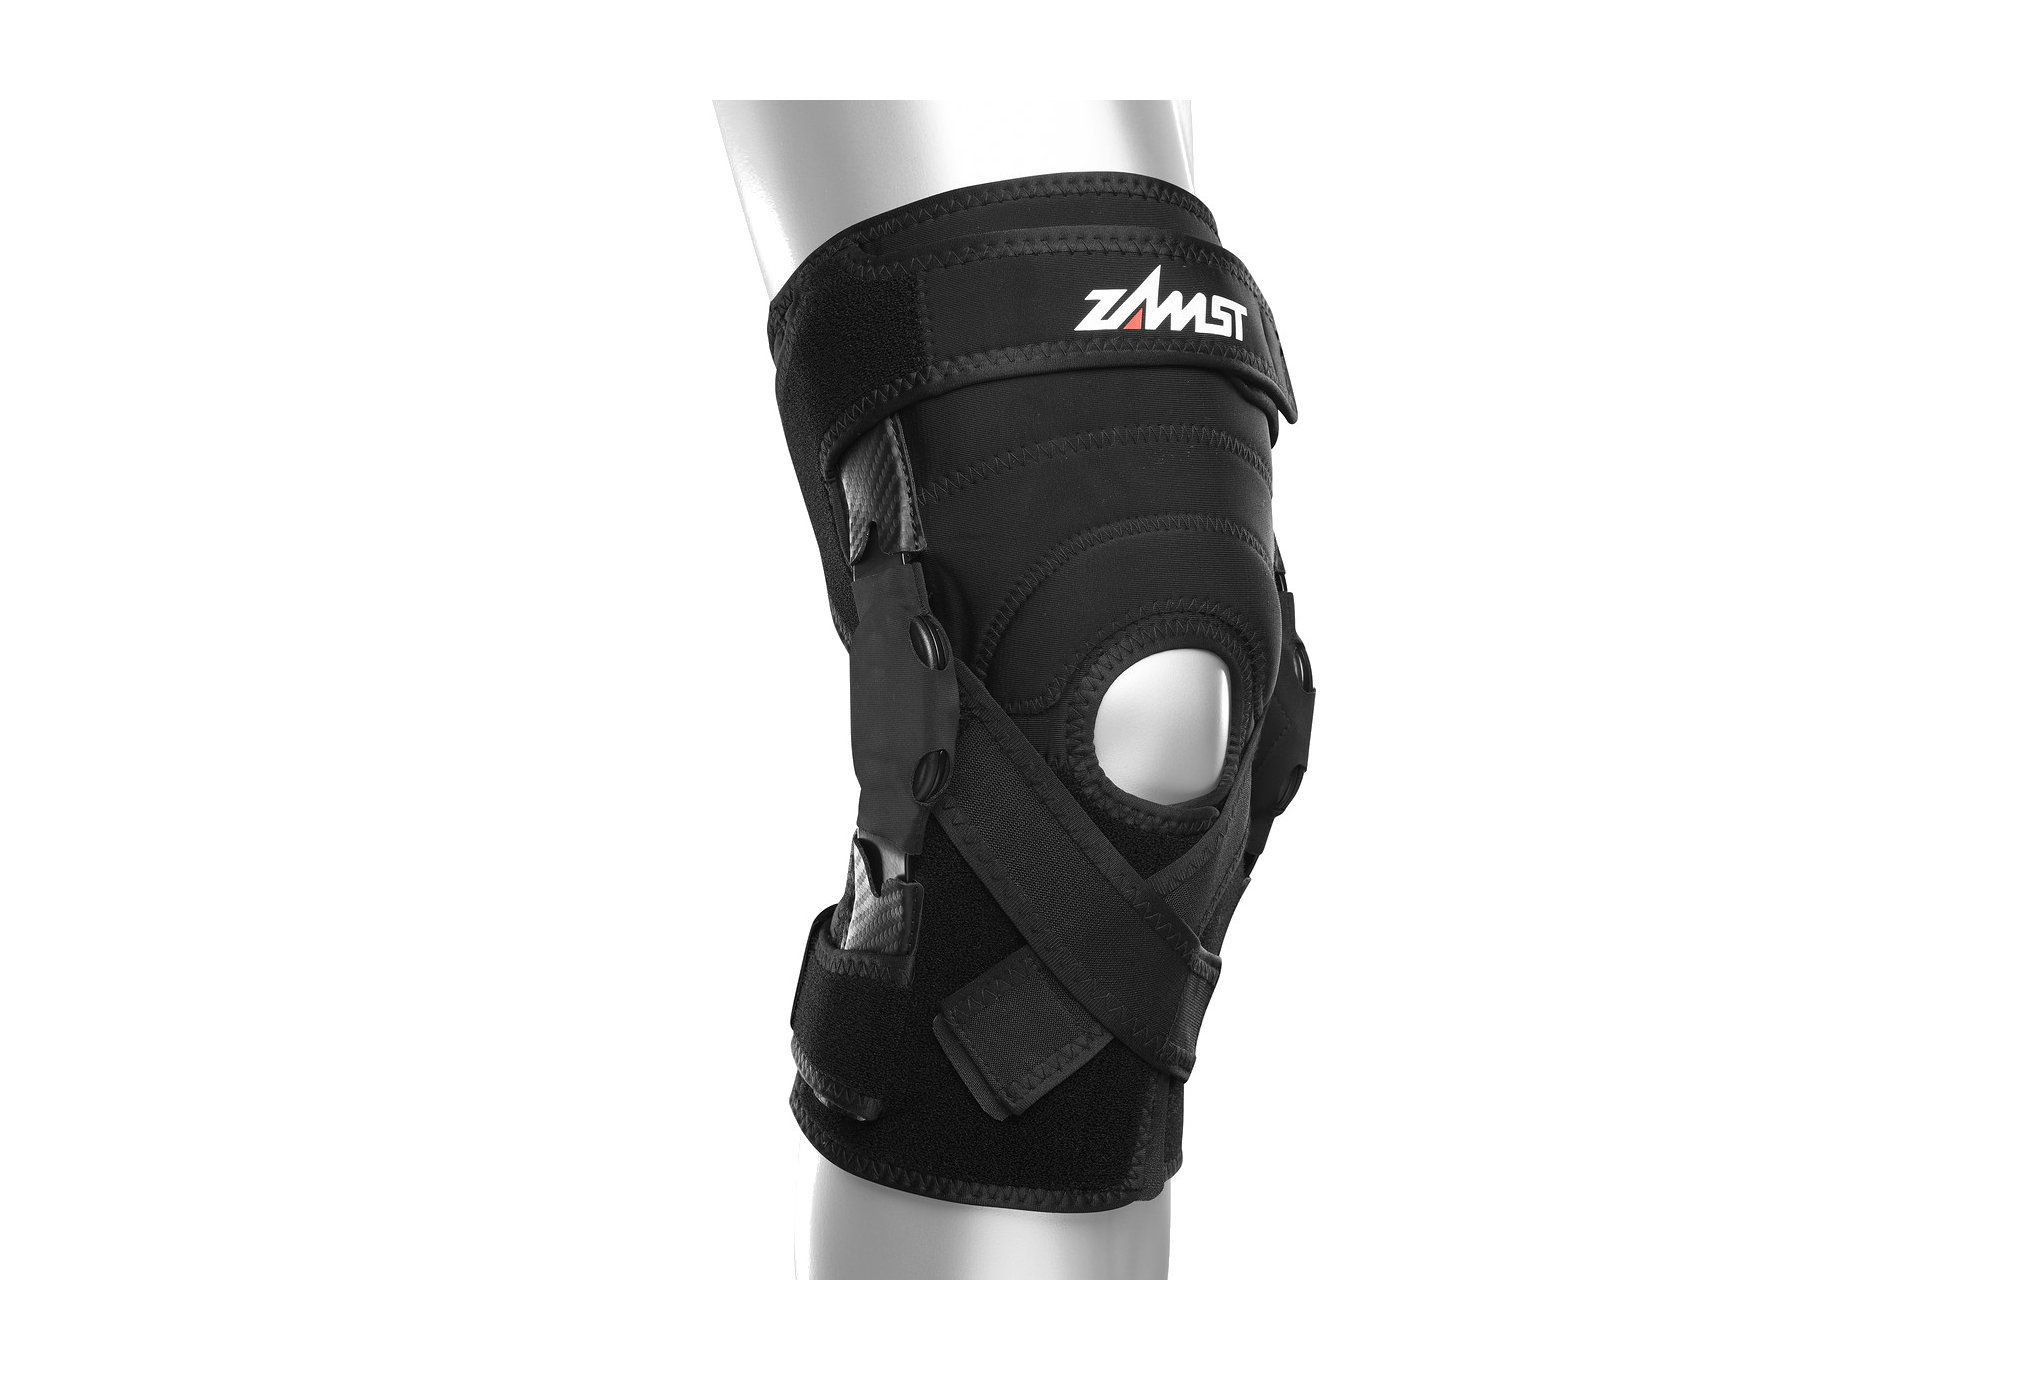 Zamst Genouillère ZK-X Protection musculaire & articulaire